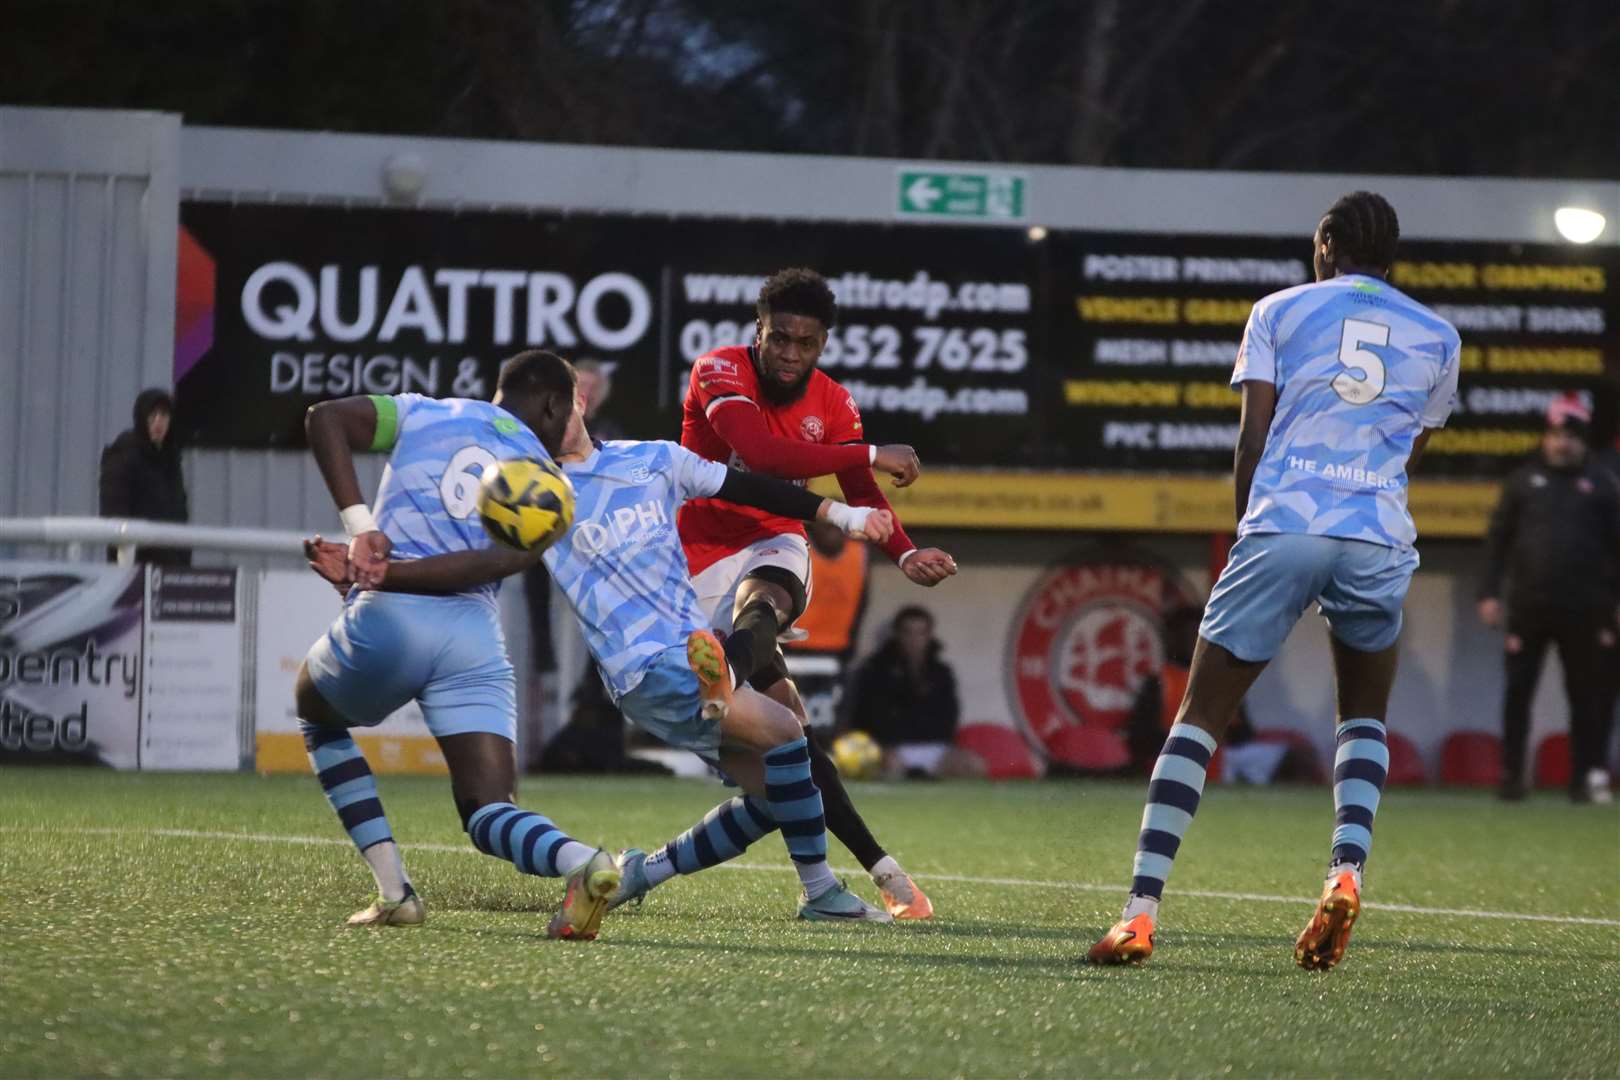 Two-goal Kareem Isiaka goes for goal against Cheshunt on Saturday Picture: Max English (@max_ePhotos)